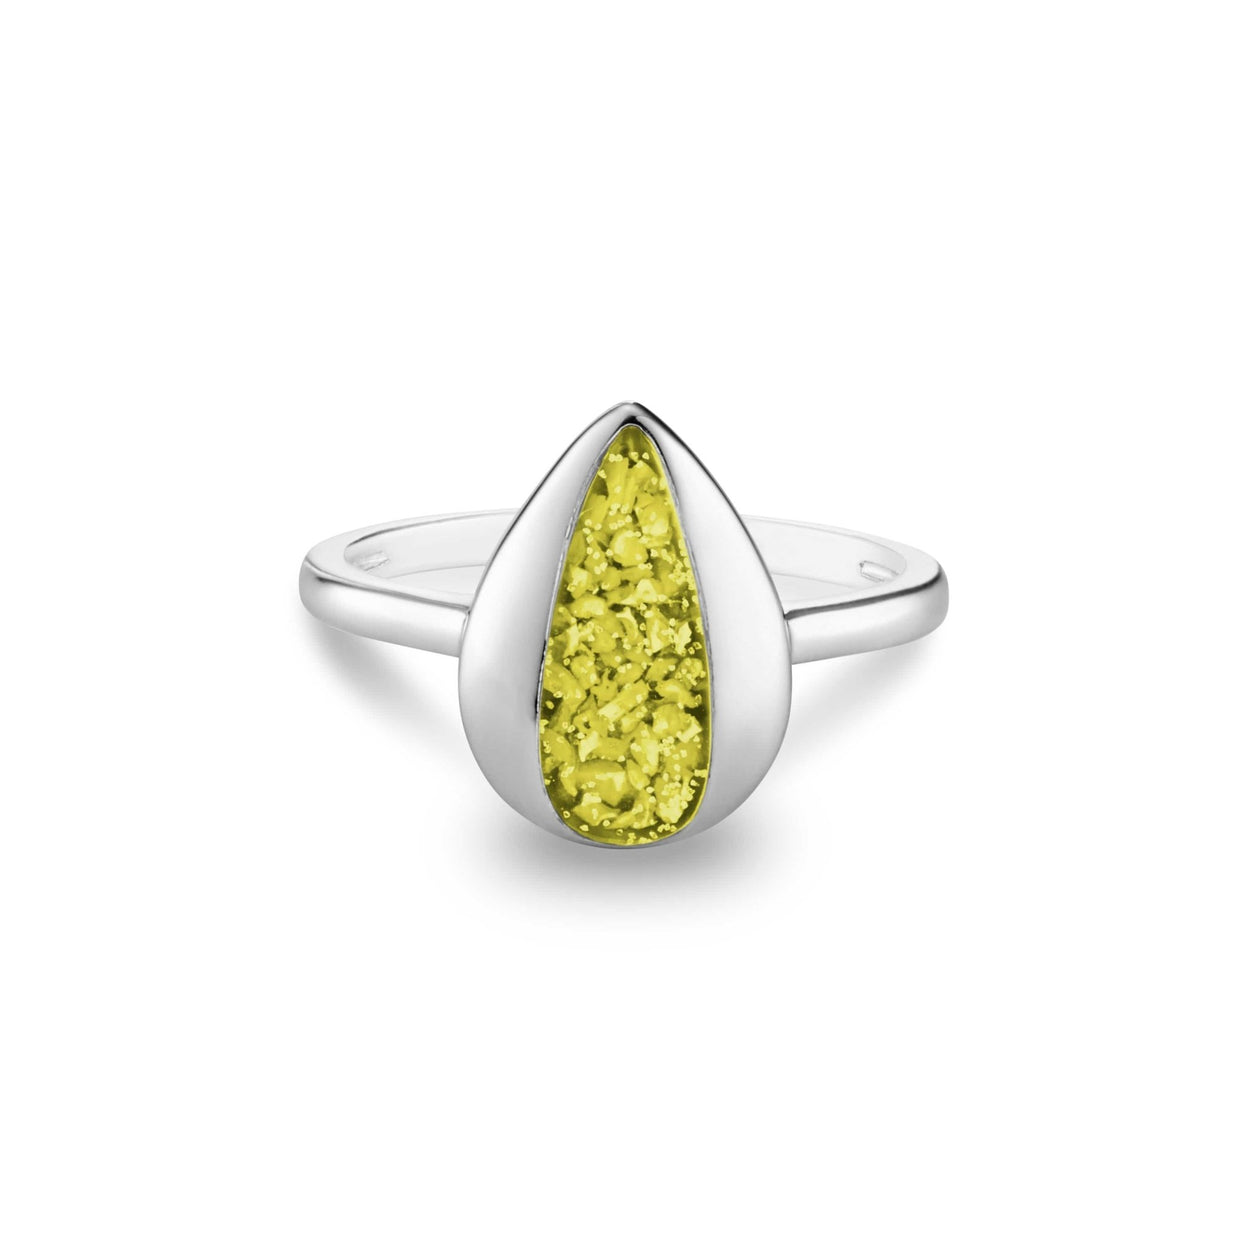 Load image into Gallery viewer, EverWith™ Ladies Rondure Teardrop Memorial Ashes Ring - EverWith Memorial Jewellery - Trade